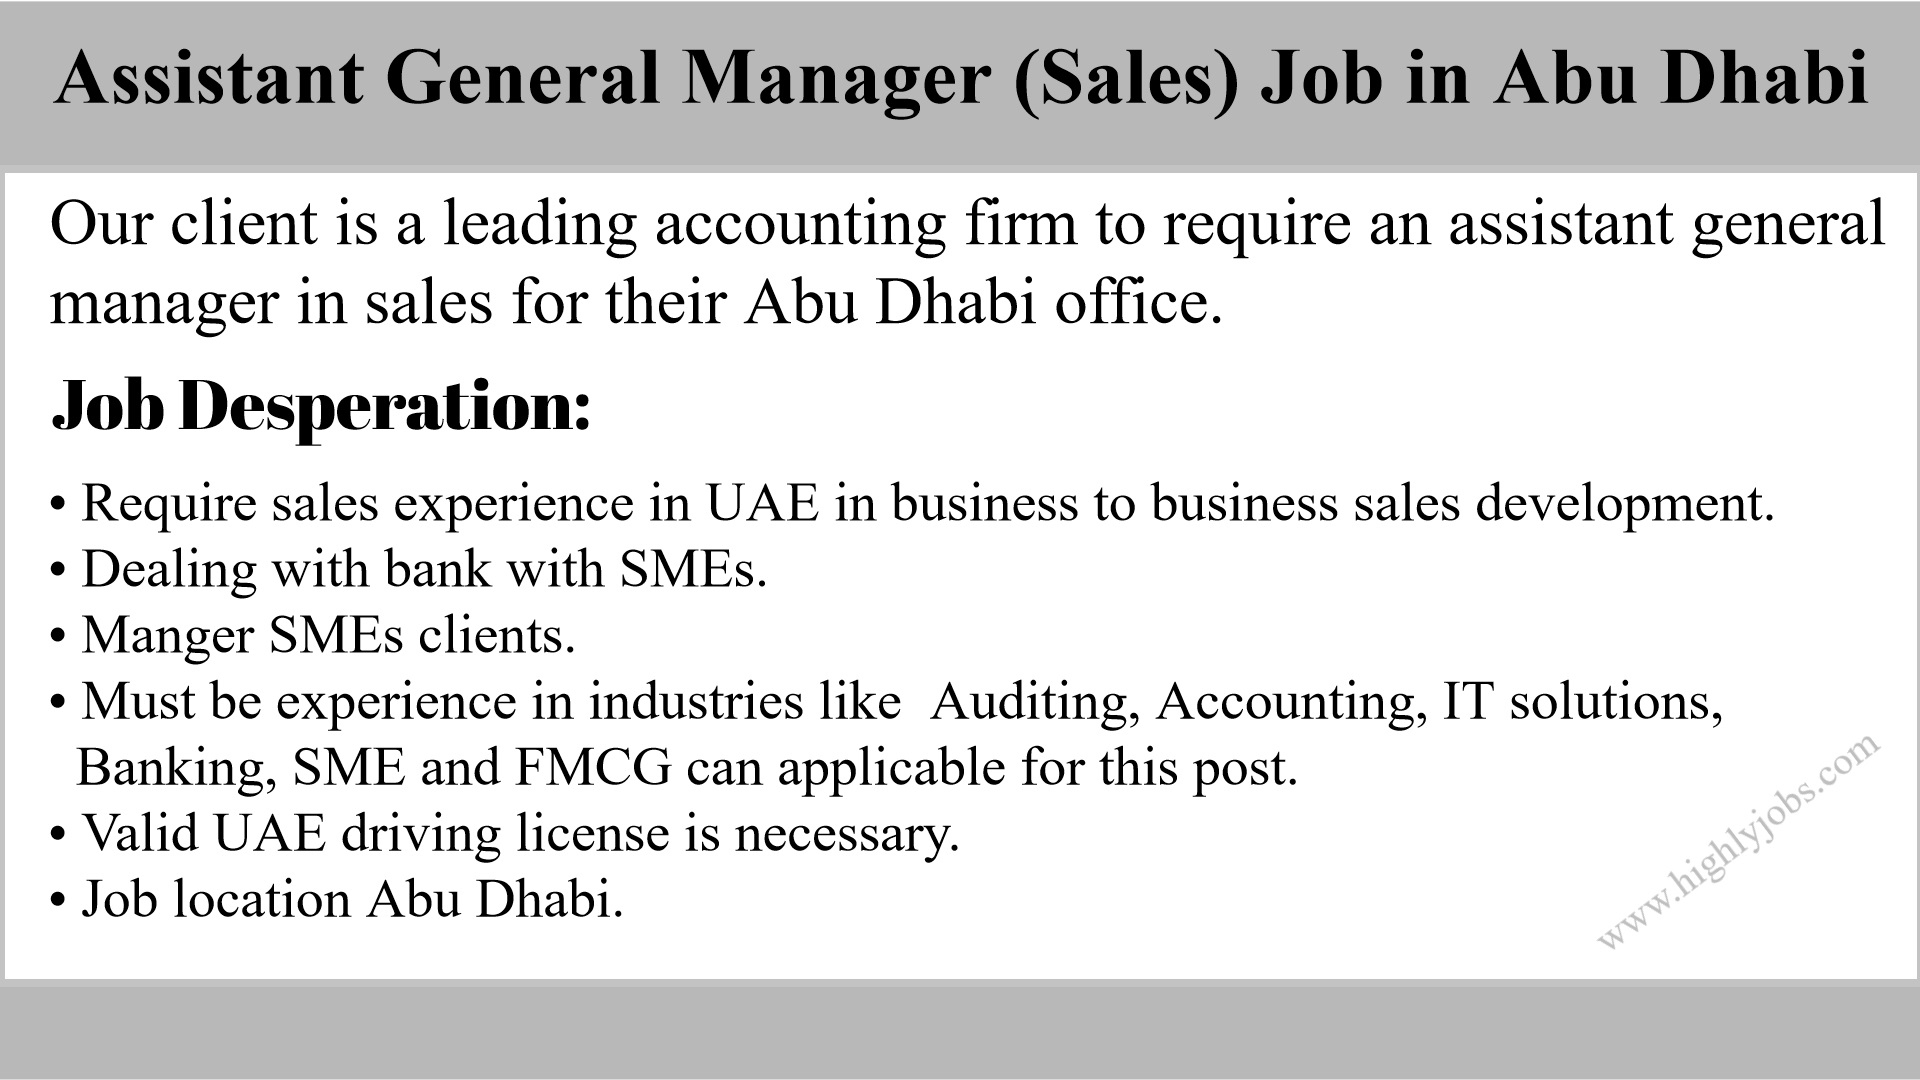 Assistant General Manager Job in Abu Dhabi